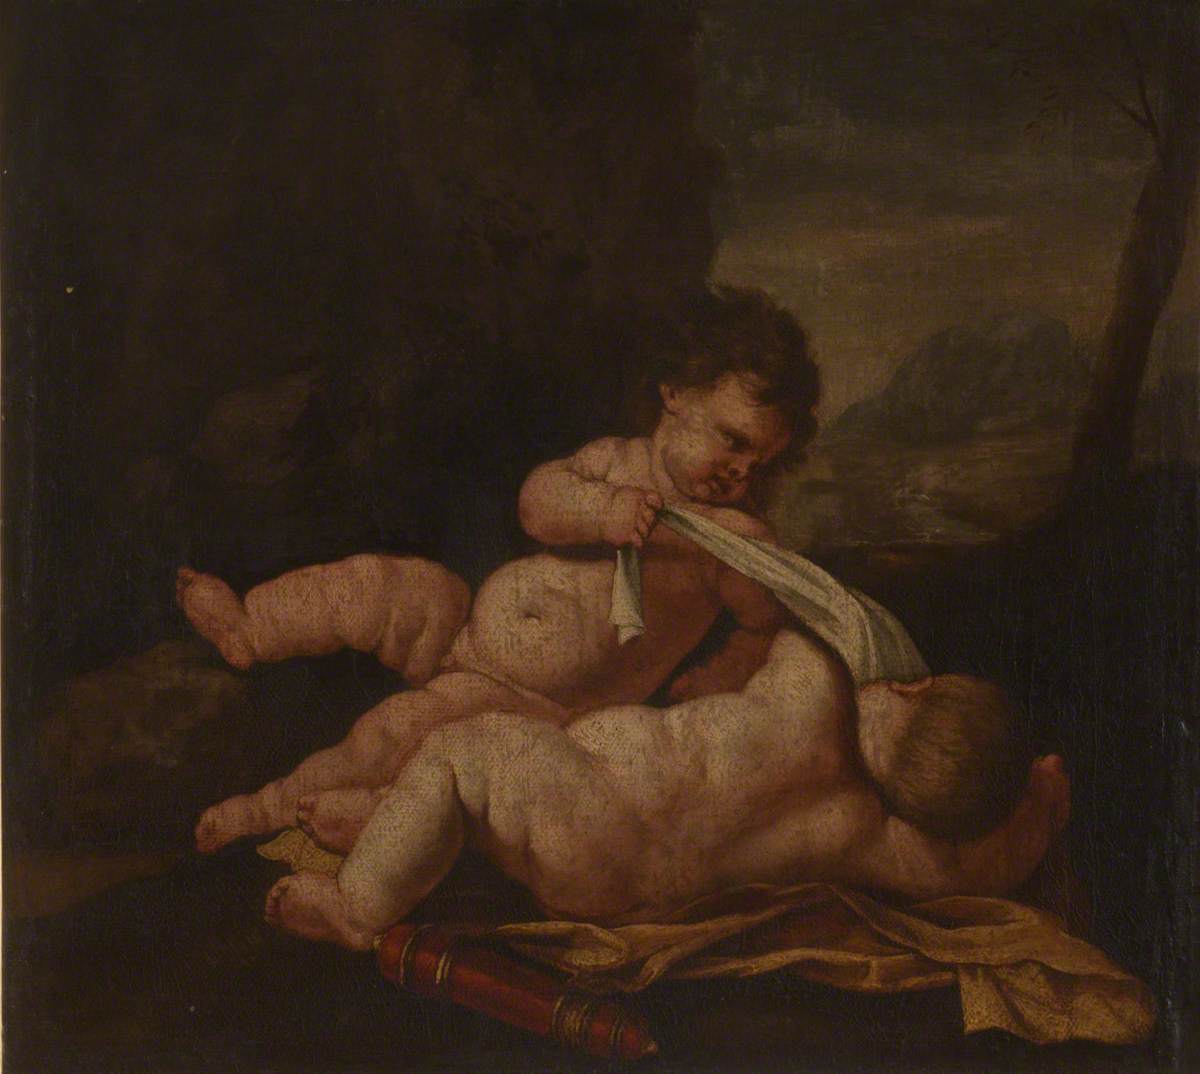 Two Putti Playing in a Landscape